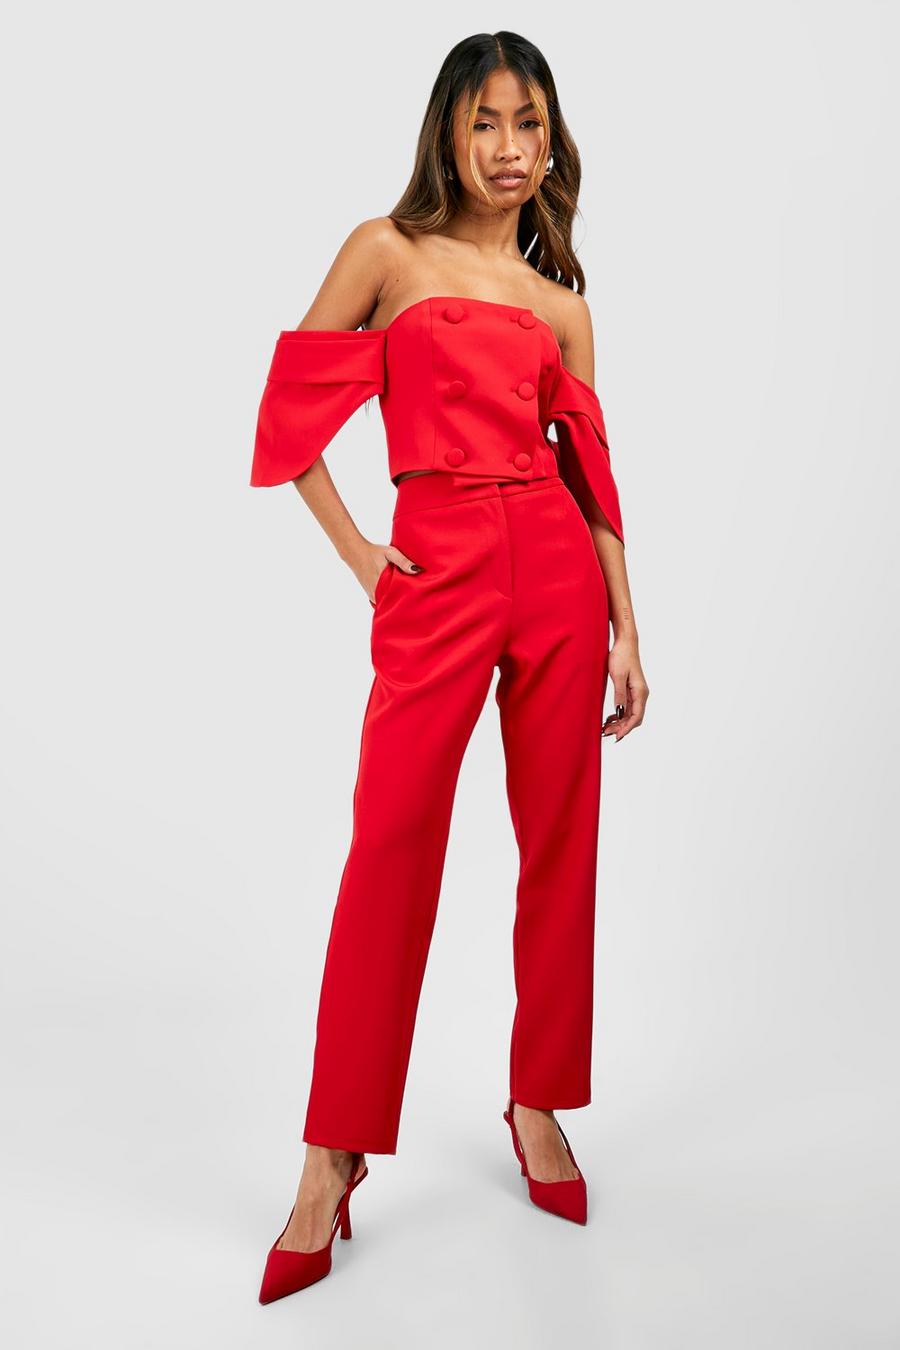 Red Slim Fit Ankle Grazer Tailored Trousers